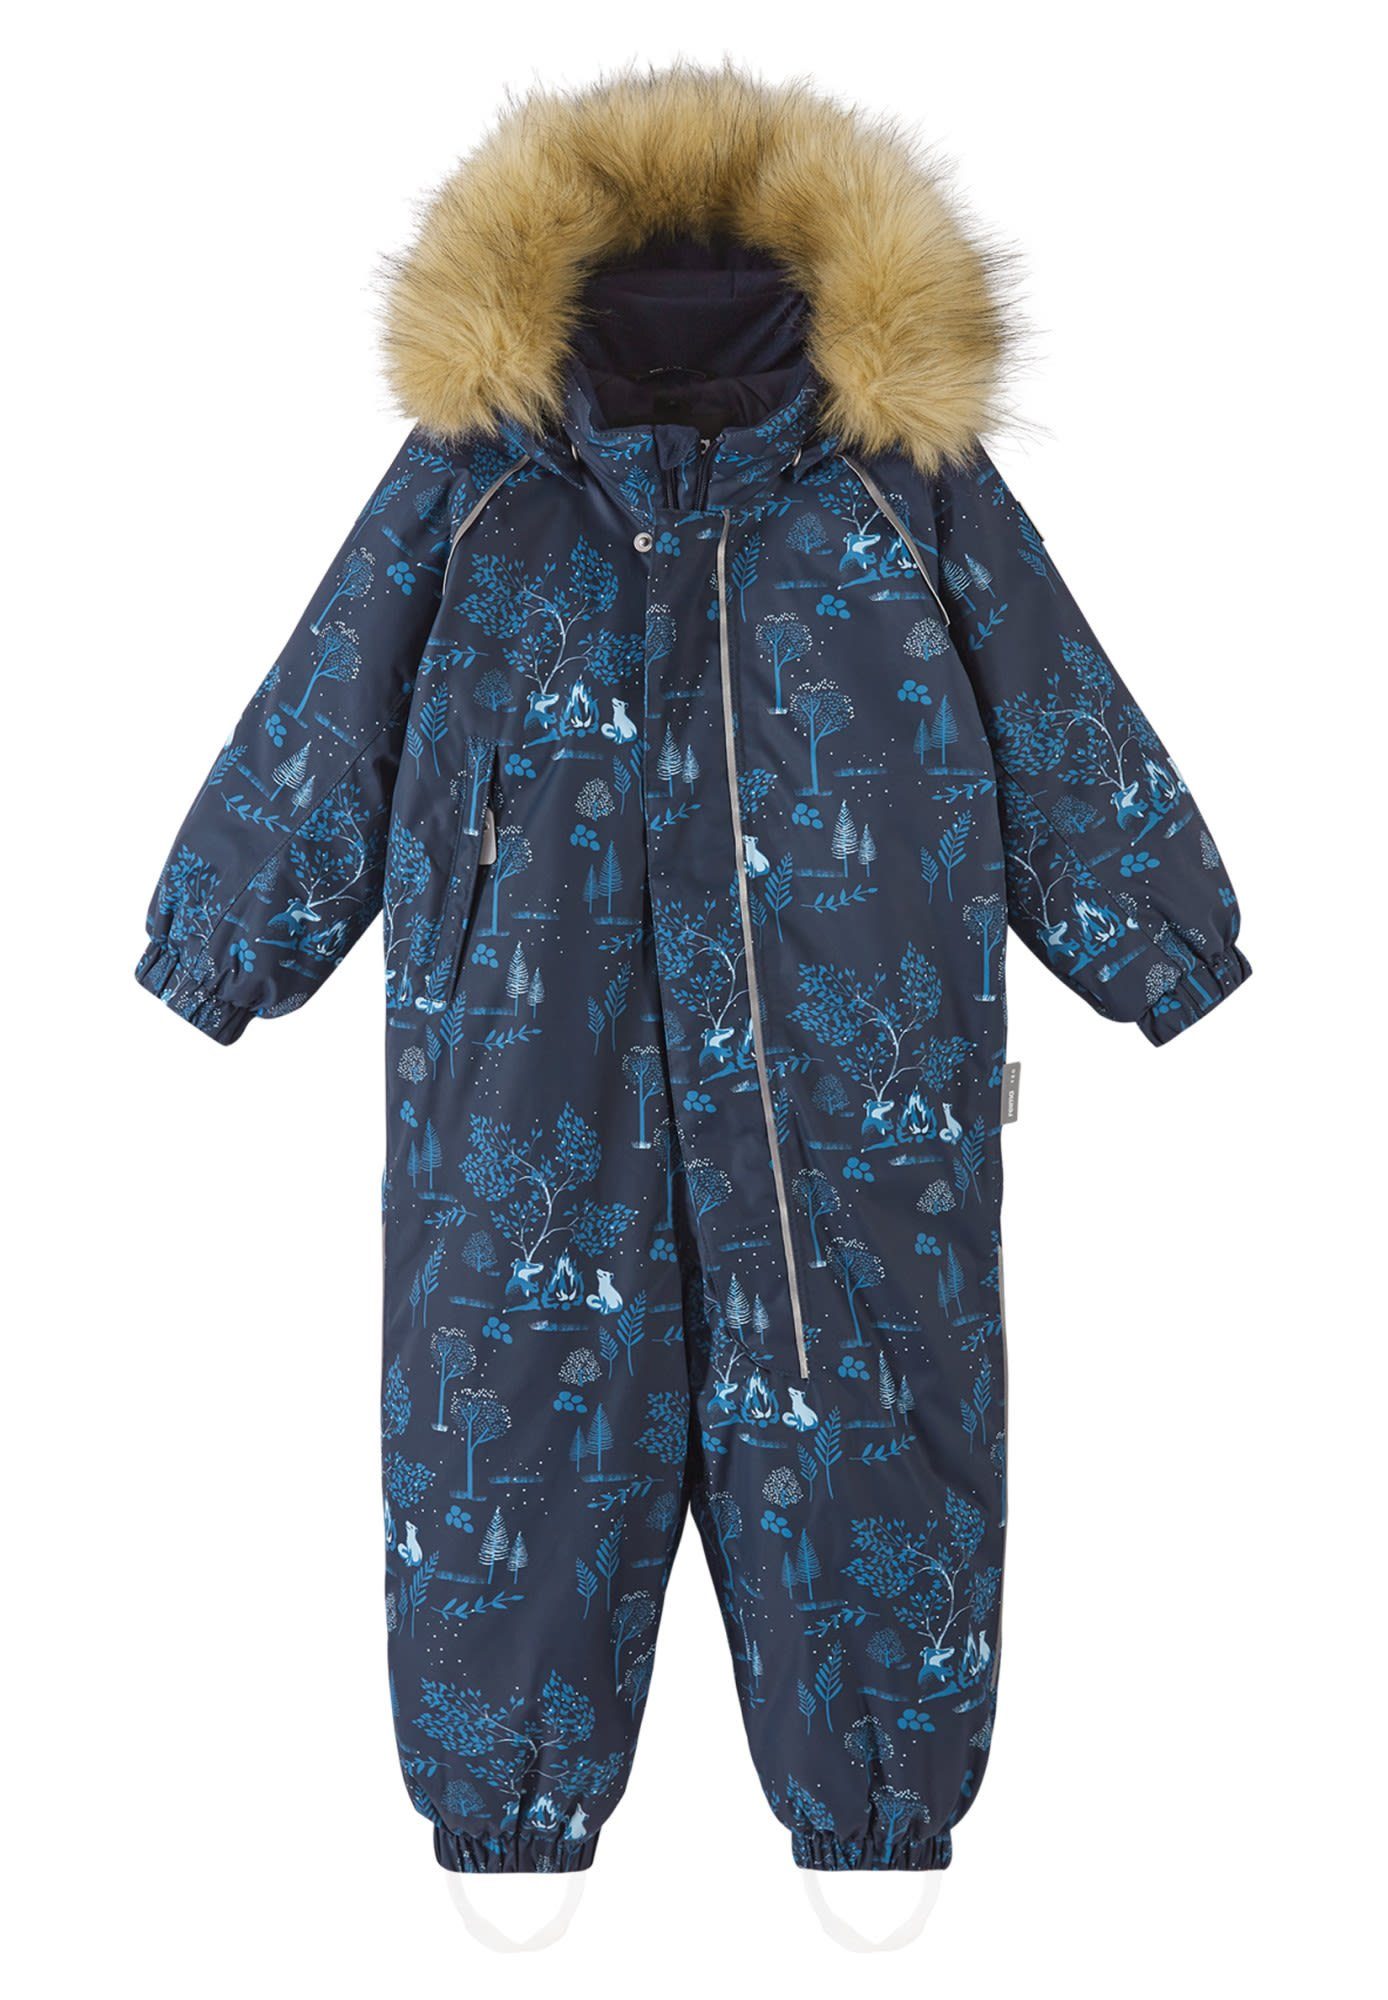 Navy Overall reima Toddlers Lappi Reima Kinder Overall Winter